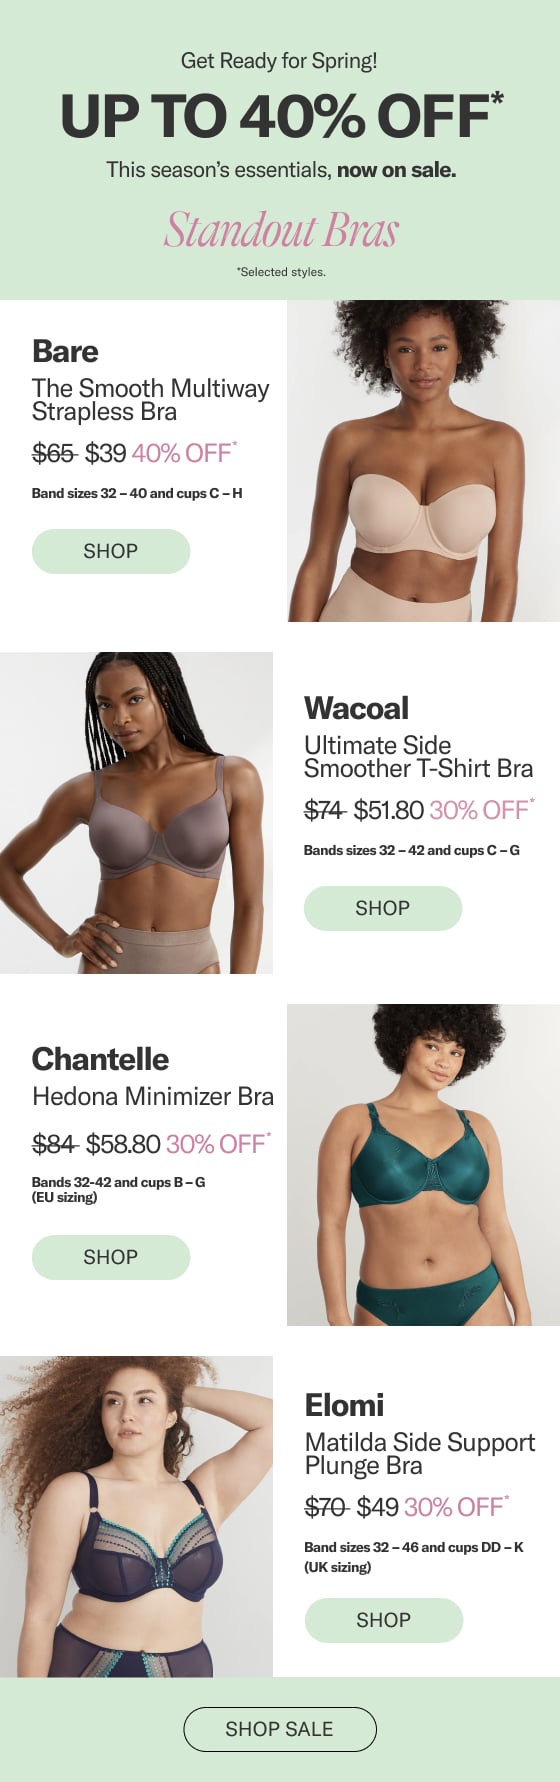 Bra Necessities - Just a few more hours to get 40% off All Bras in